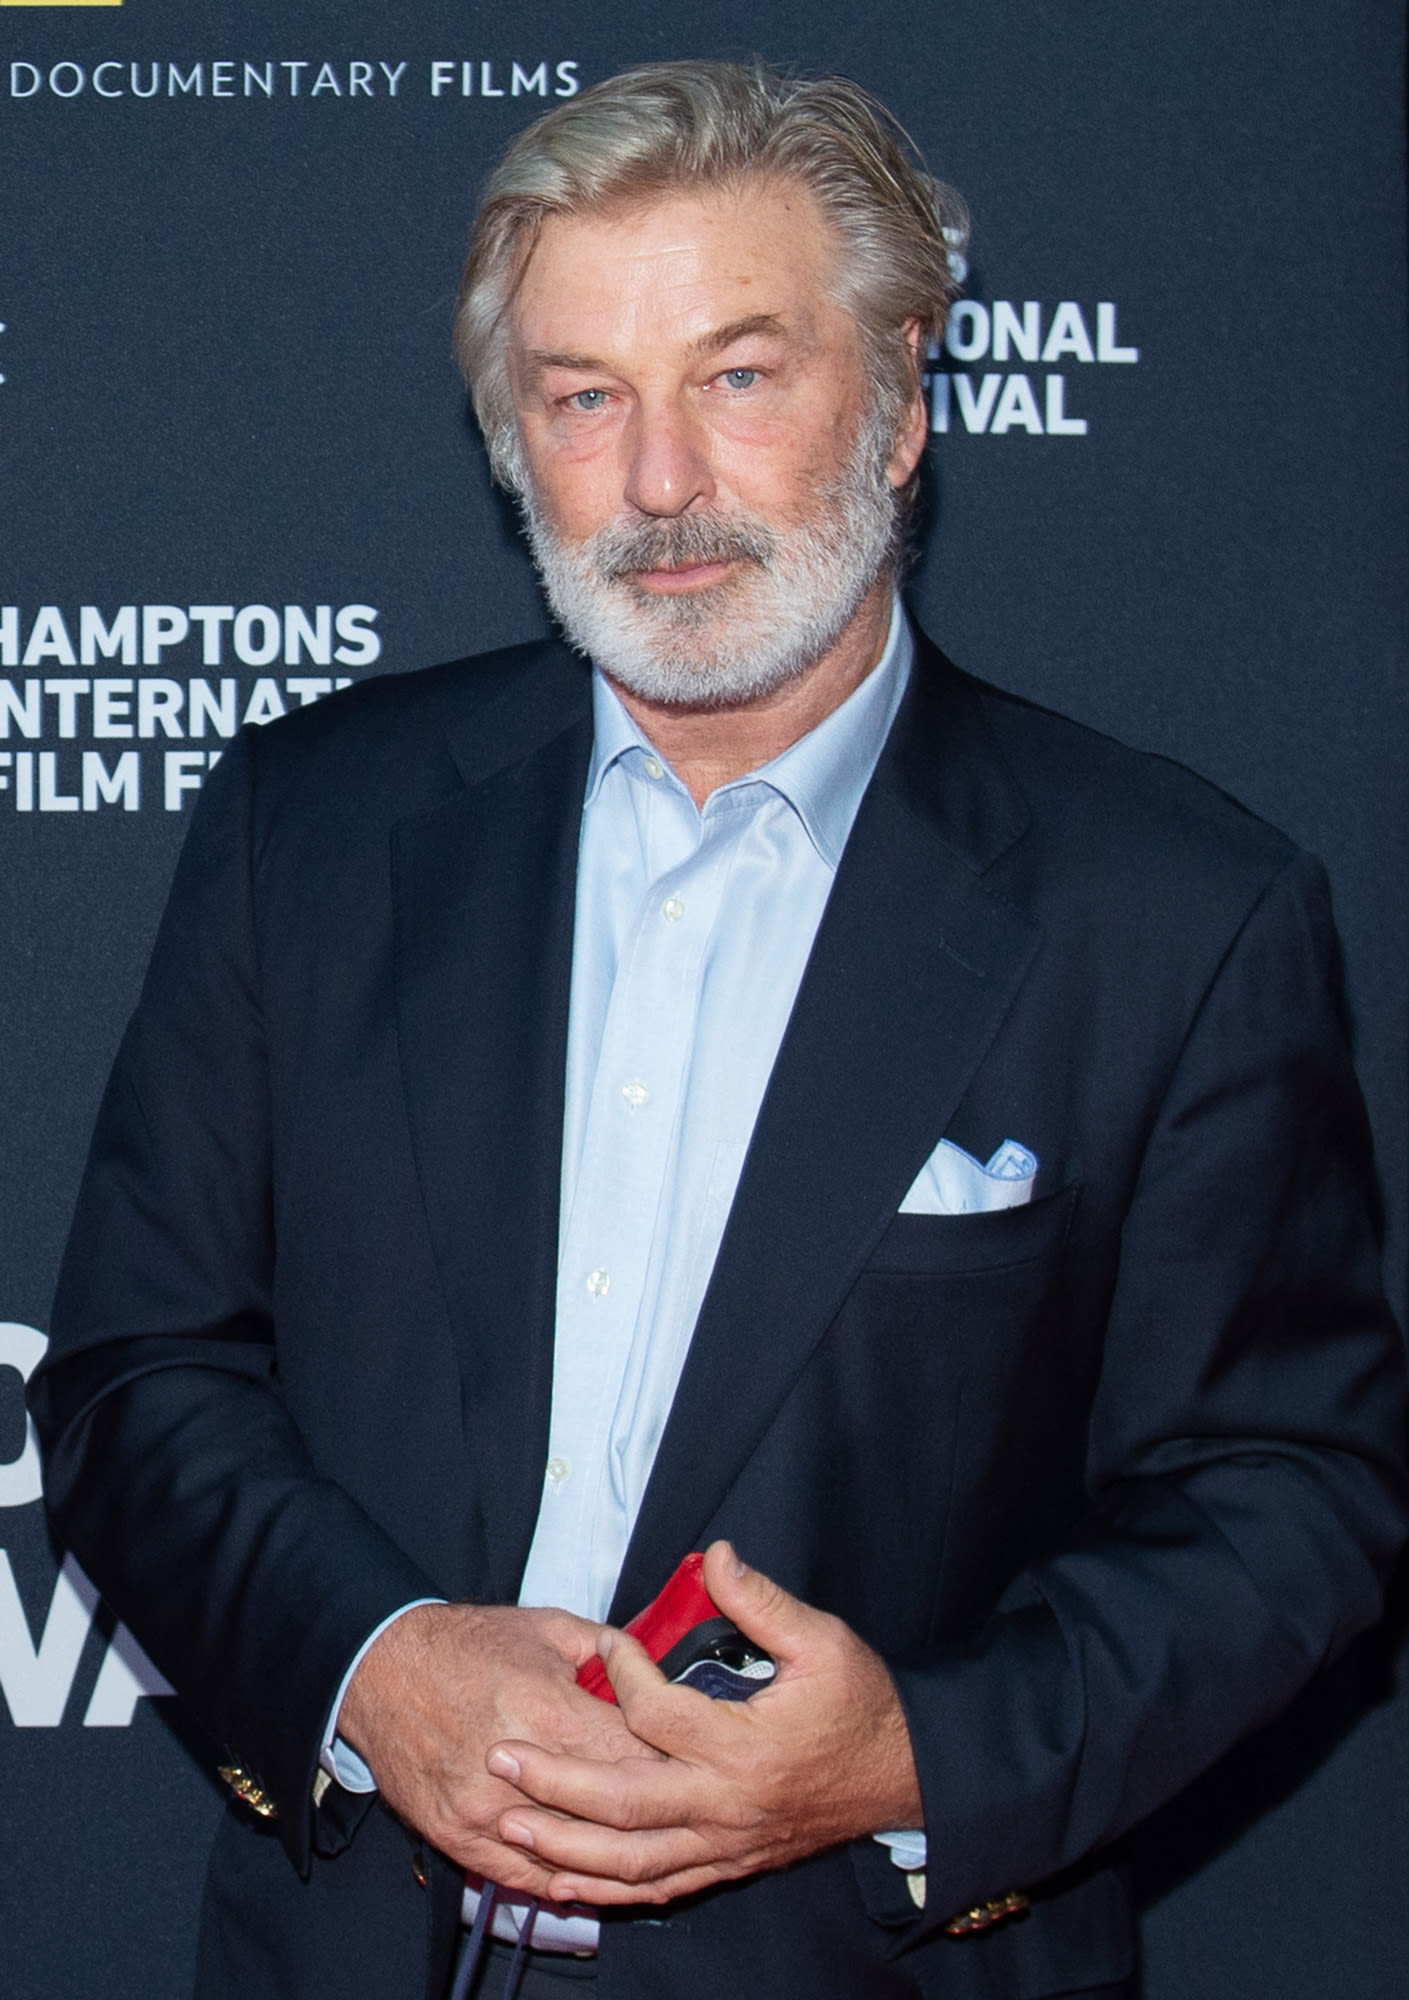 Alec Baldwin Reflects on 39 Years of Sobriety After ‘White-Hot Problem’ With Drugs and Alcohol